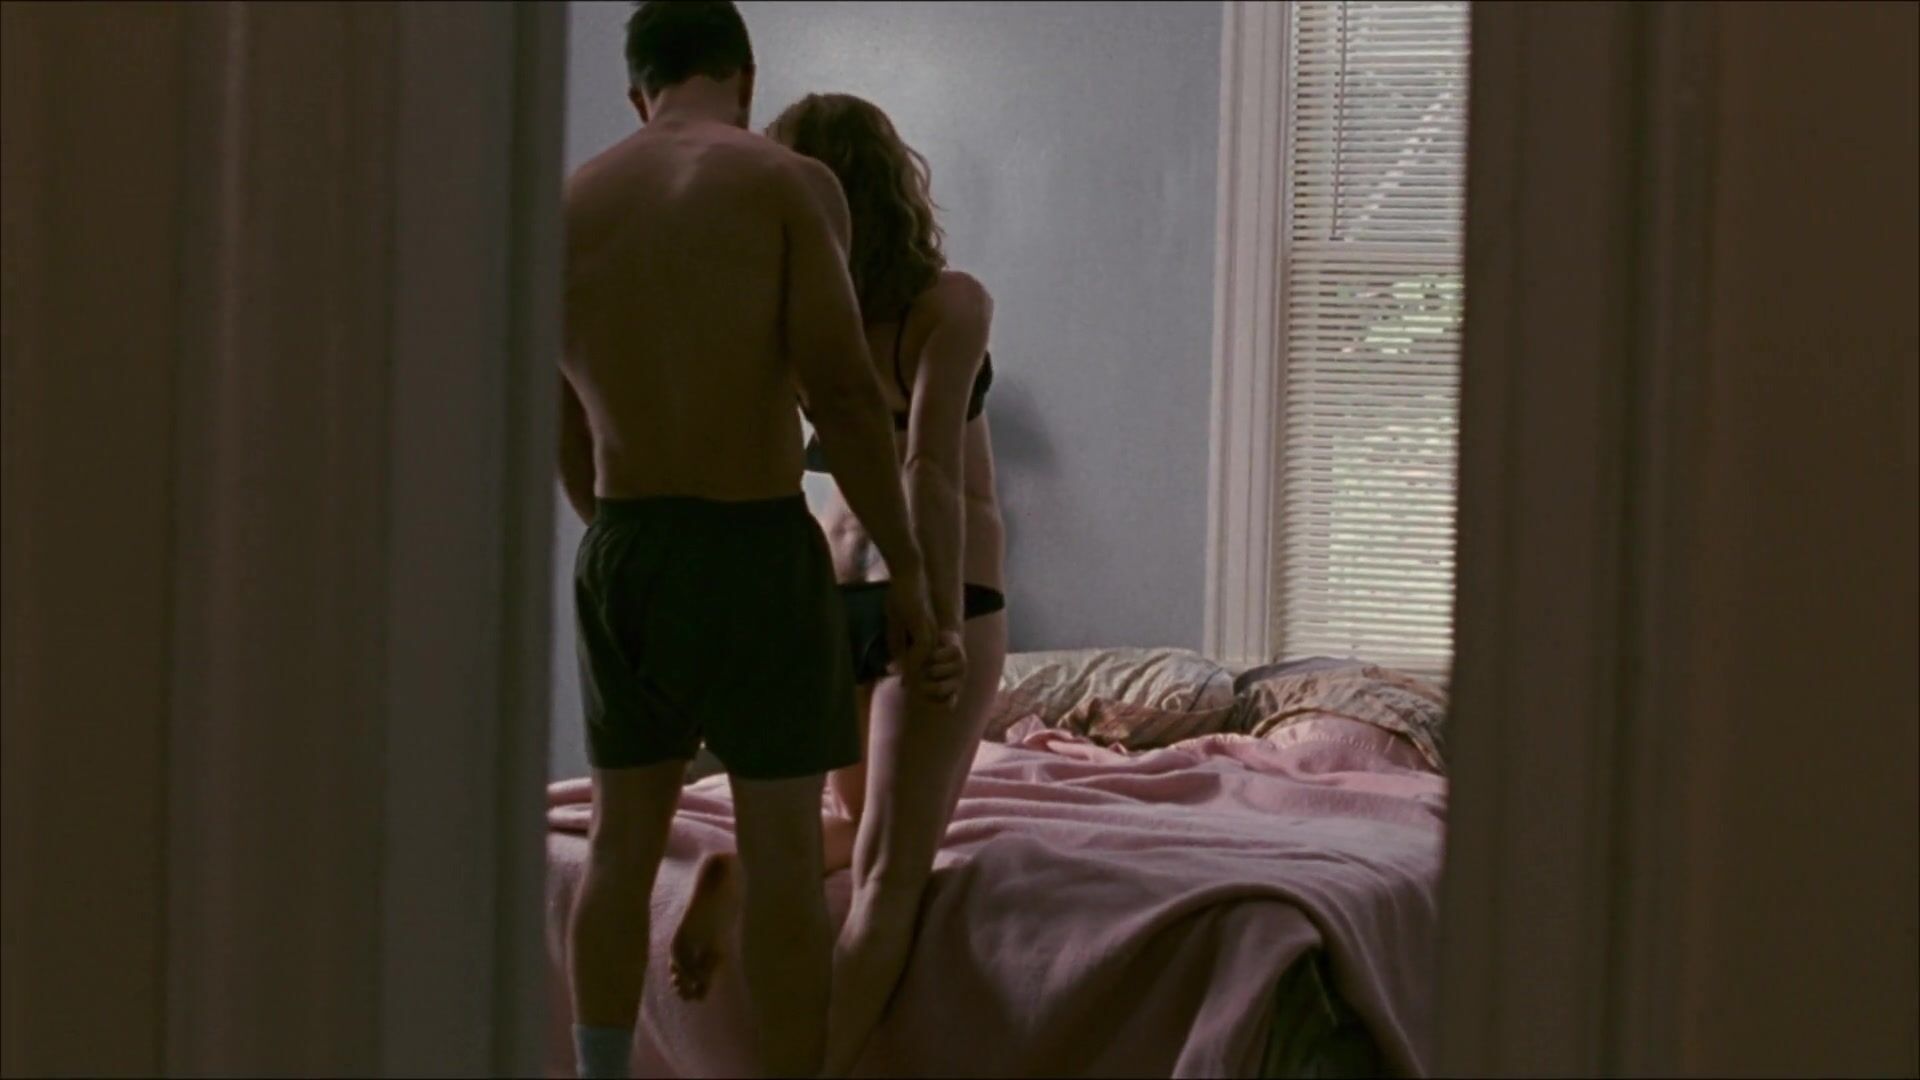 Pickup Man takes Amy Adams to bed but fails to bonk her in nude scene from The Fighter (2010) Trap - 2